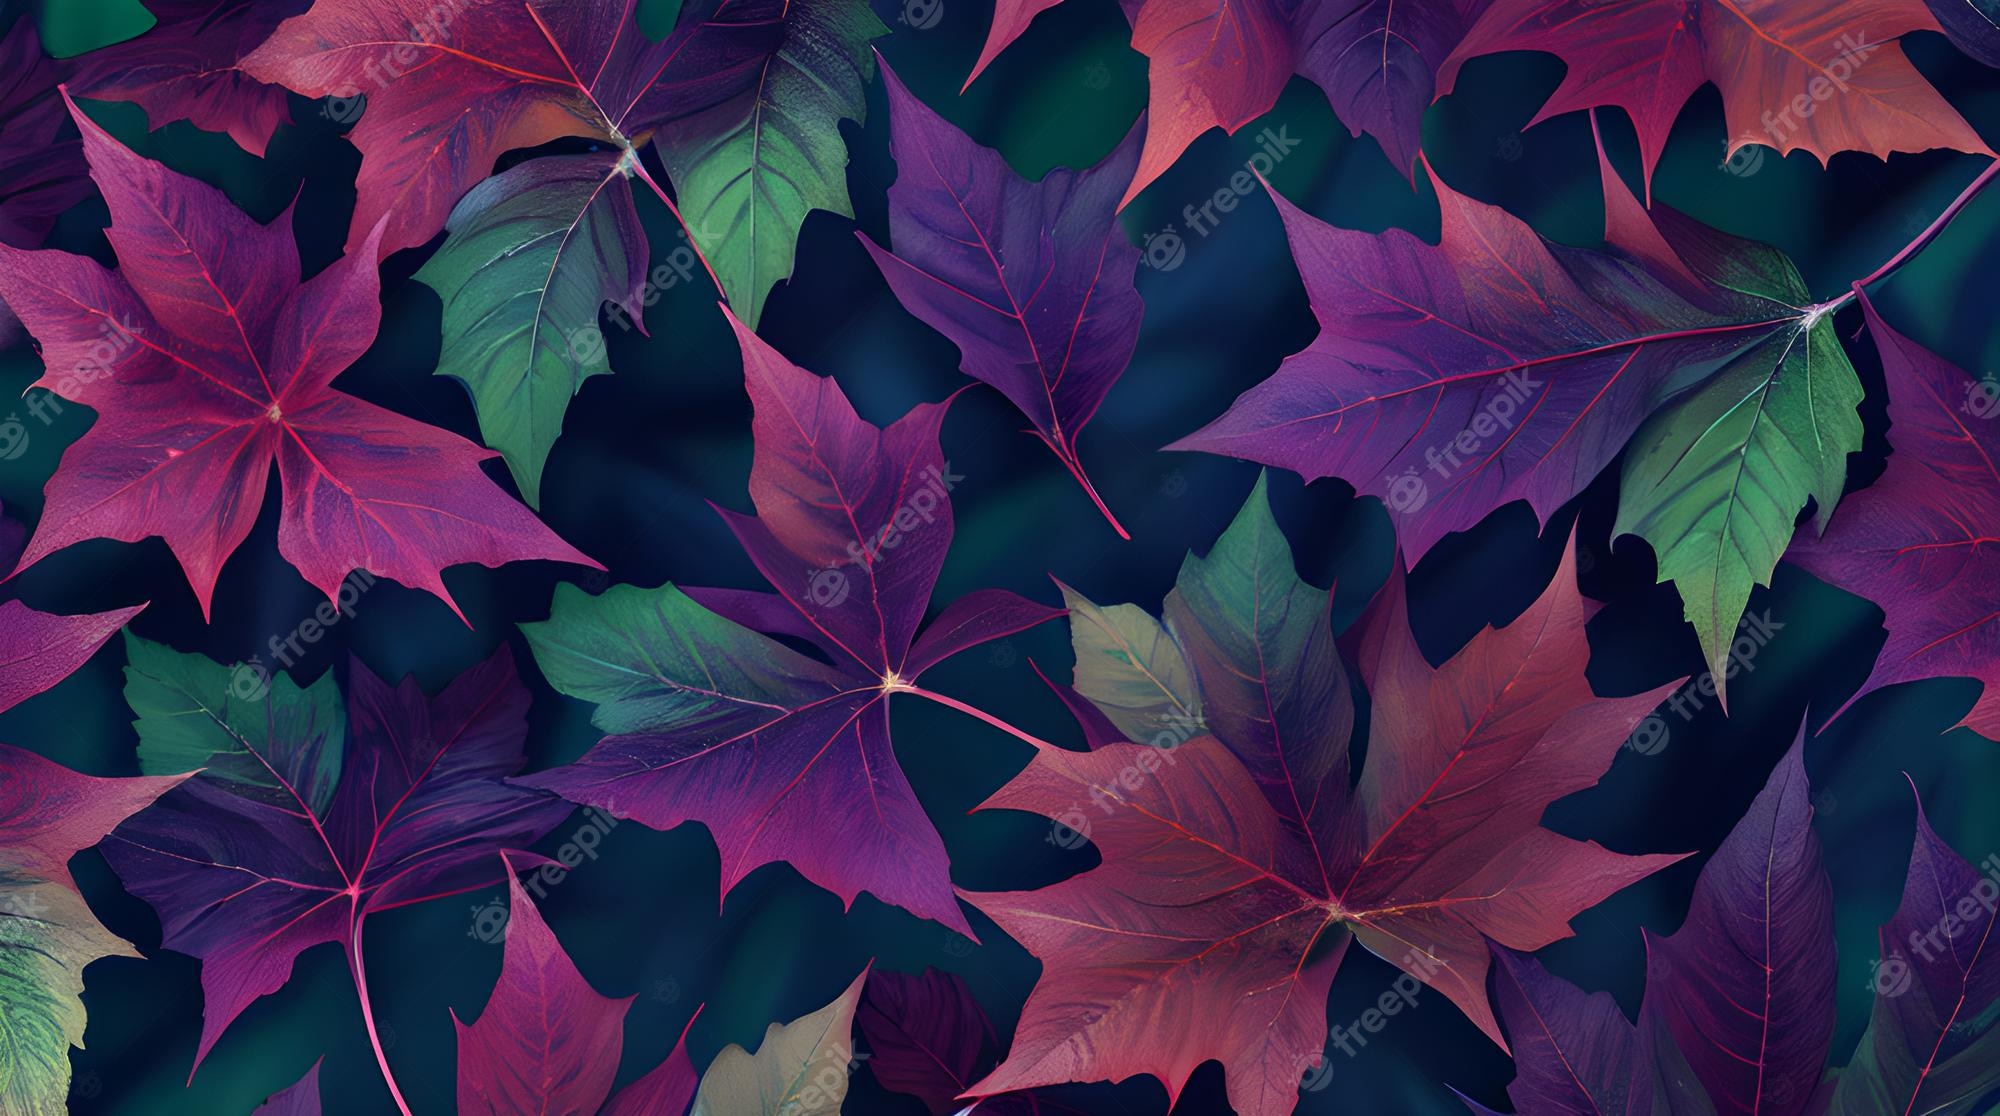 Wallpaper with a colorful leaf